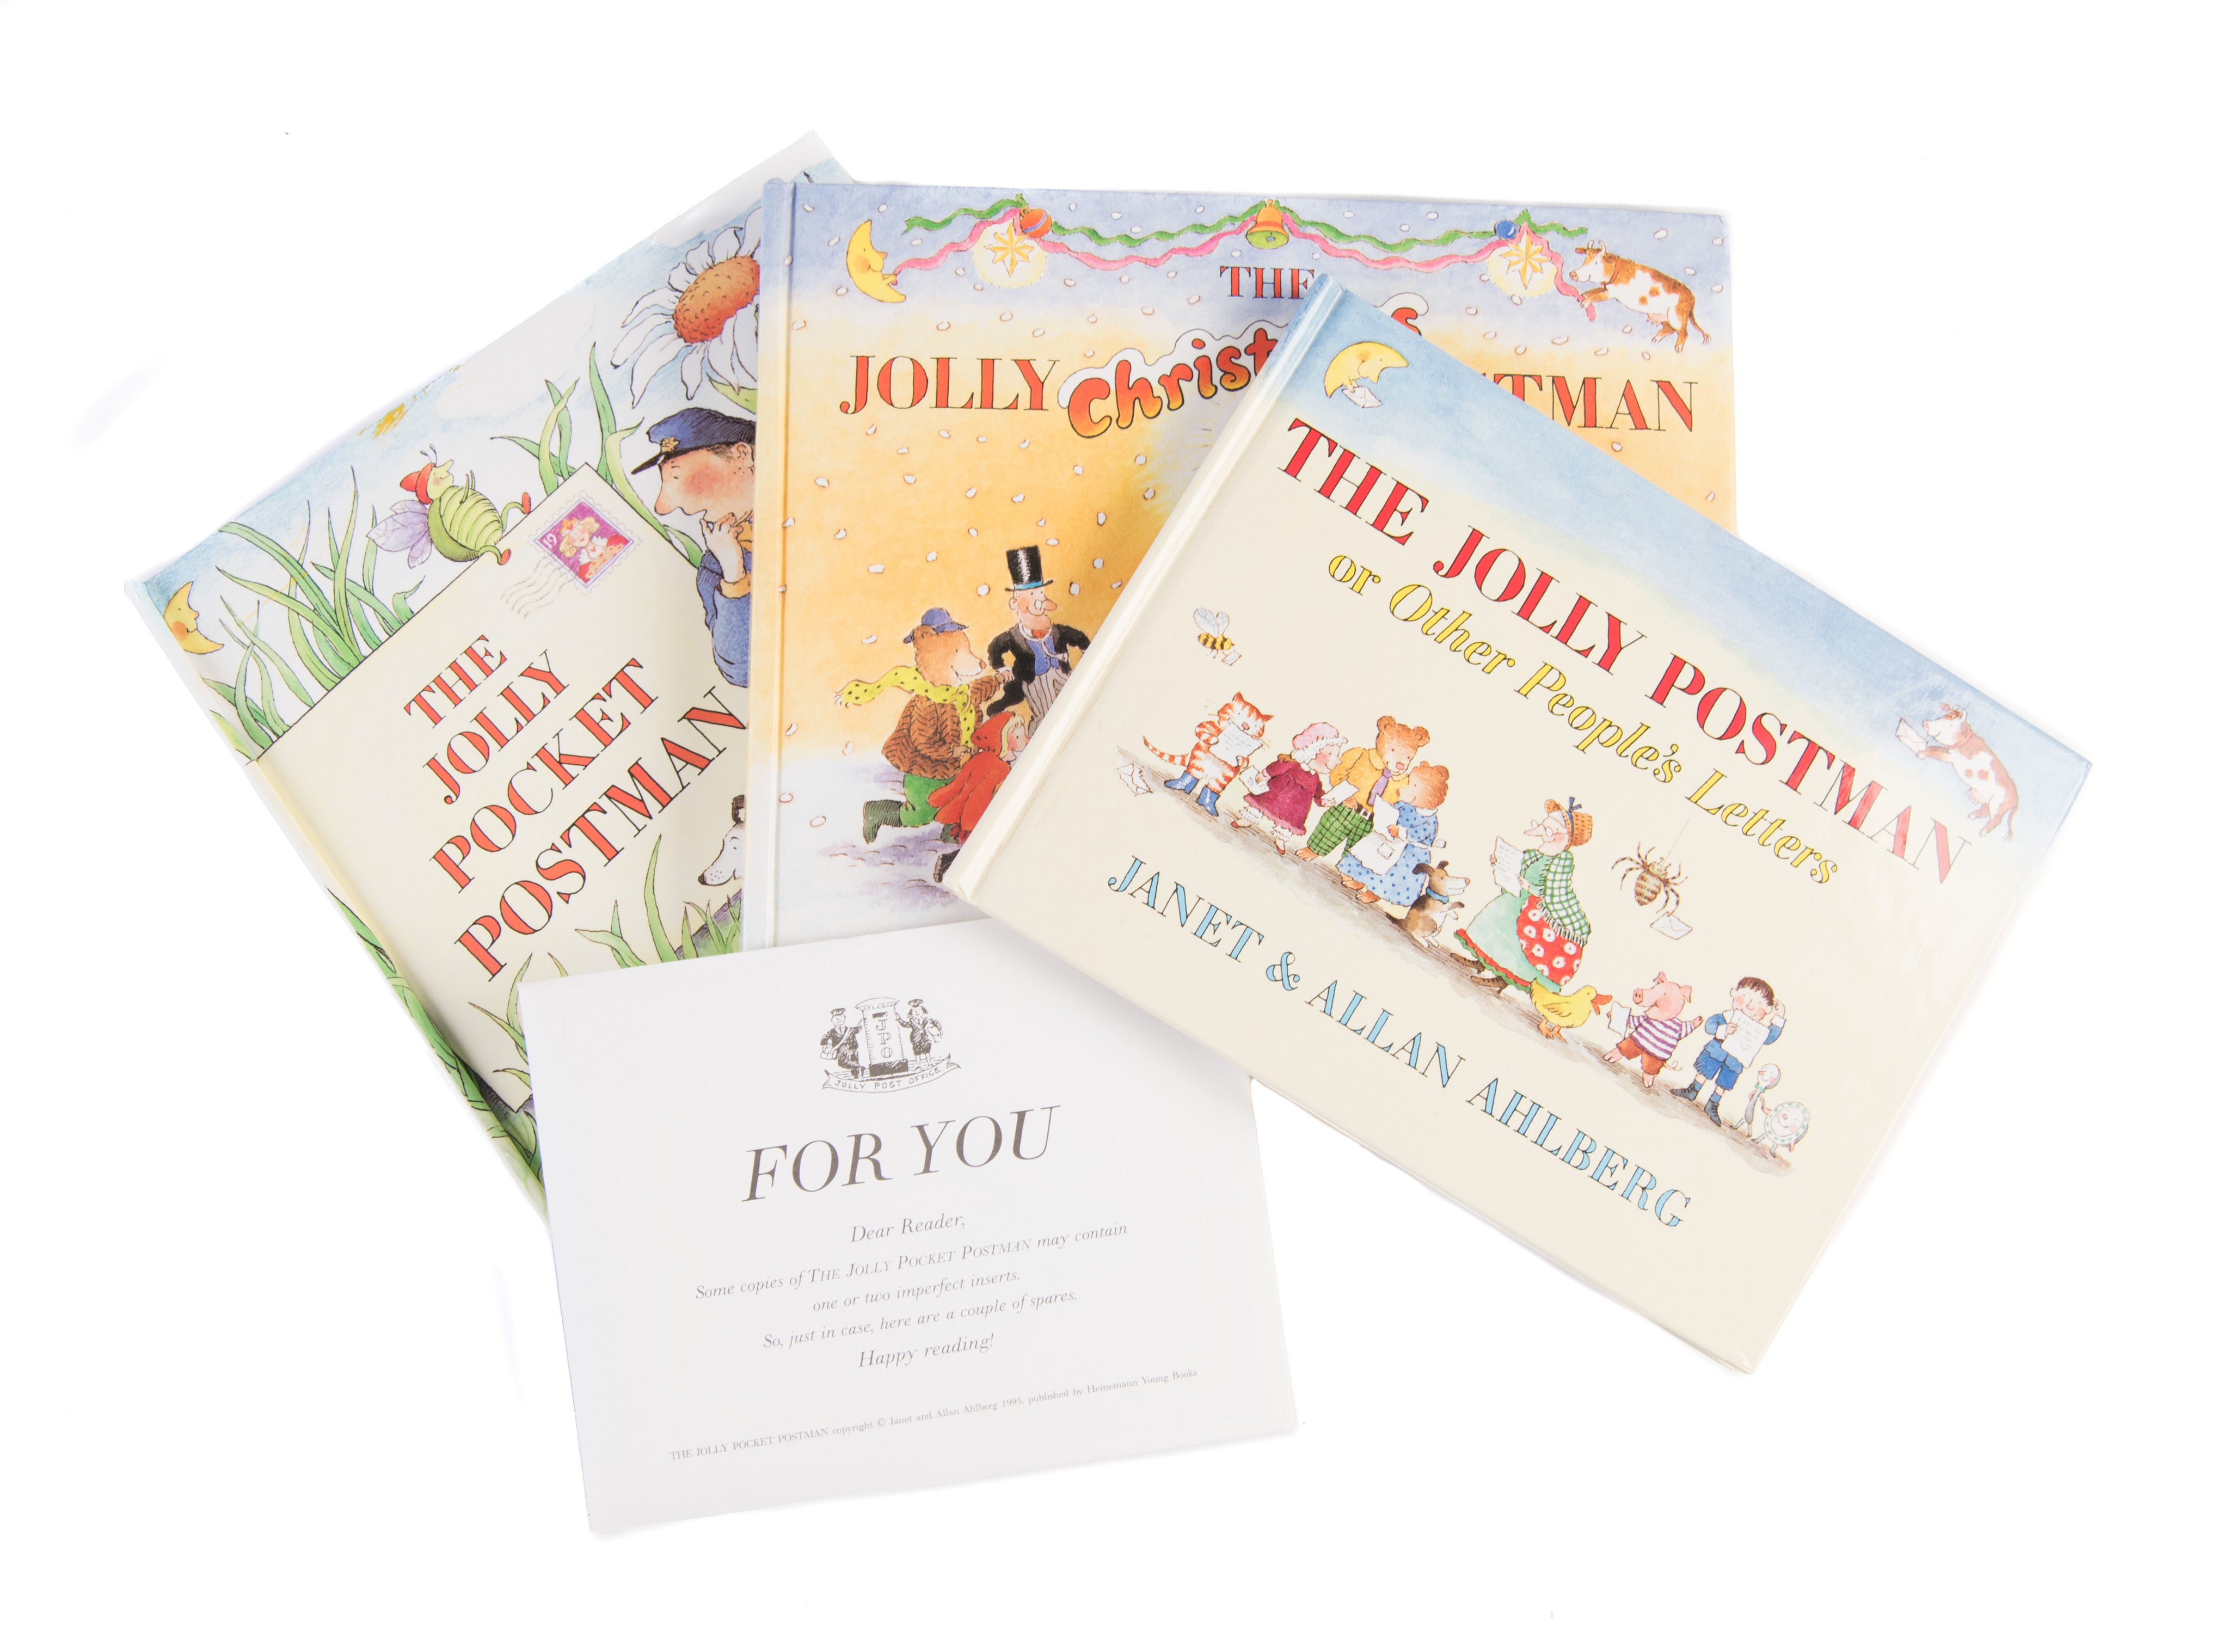 And　People's　The　First　Postman　Postman;　Letters;　Alan.;　Jolly　Jolly　Edition　Christmas　AHLBERG　The　Jolly　AHLBERG　Janet　Postman　The　Other　Pocket